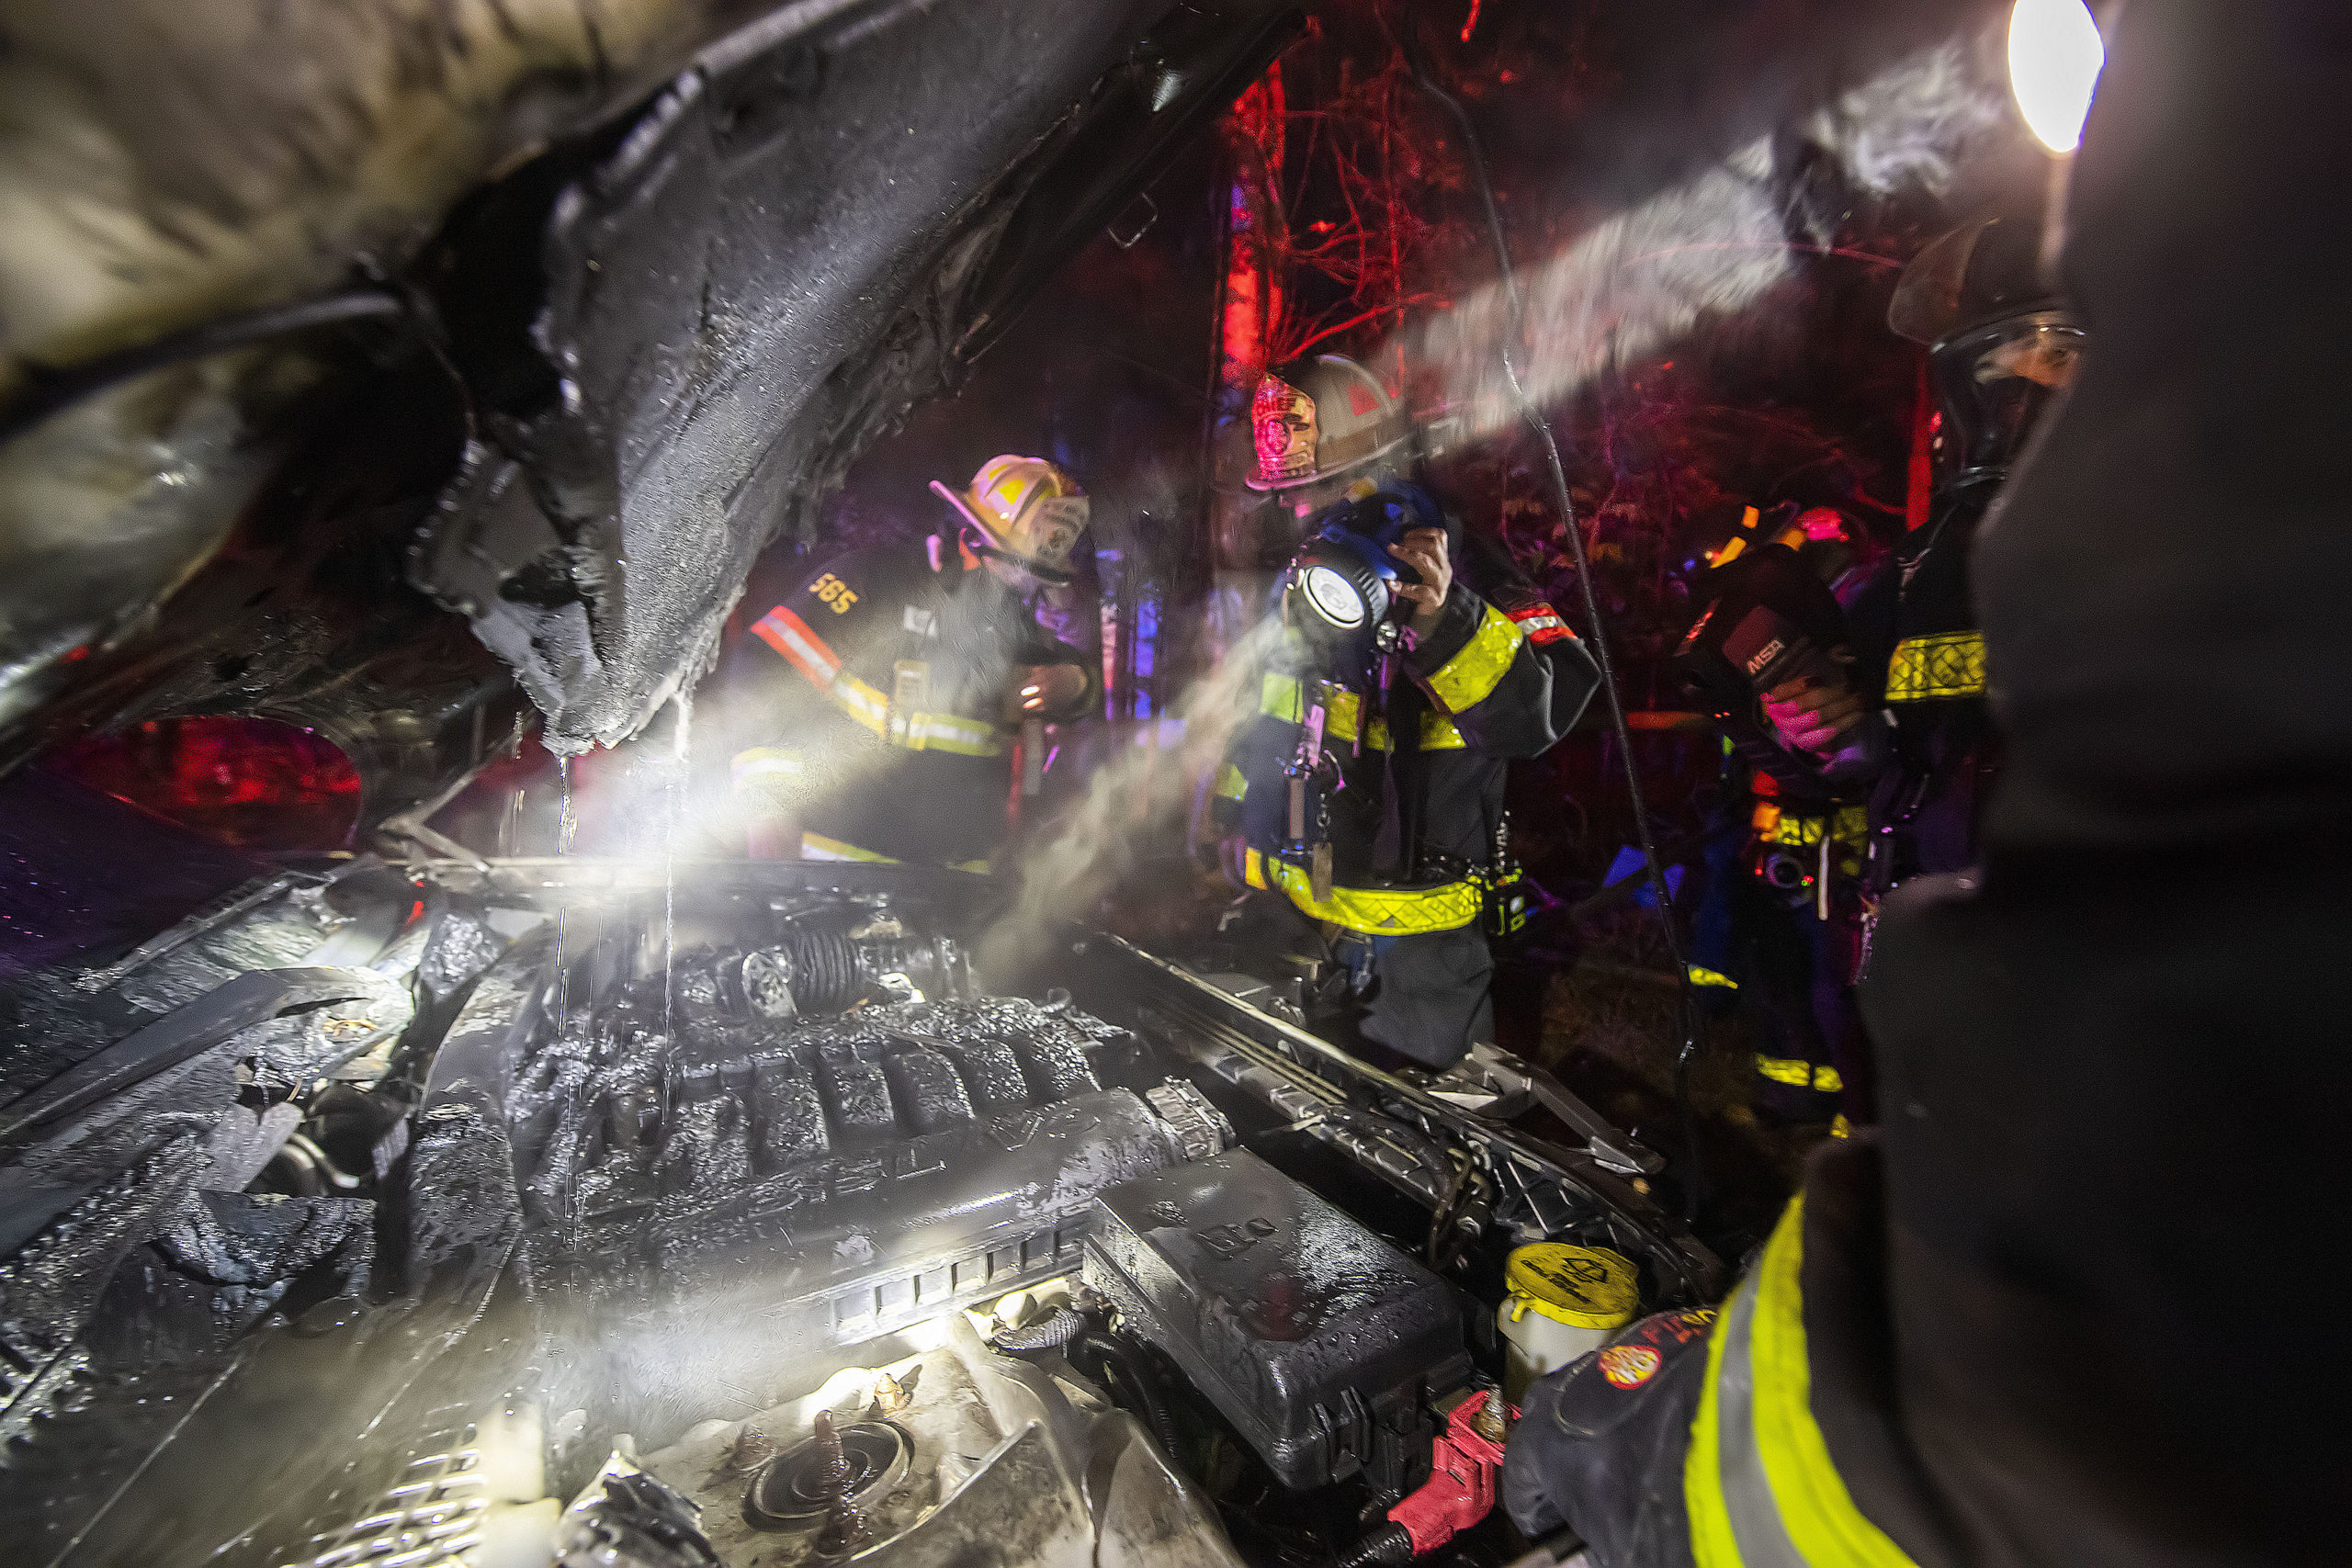 The East Hampton Fire Department responded to a car fire on Friday night.